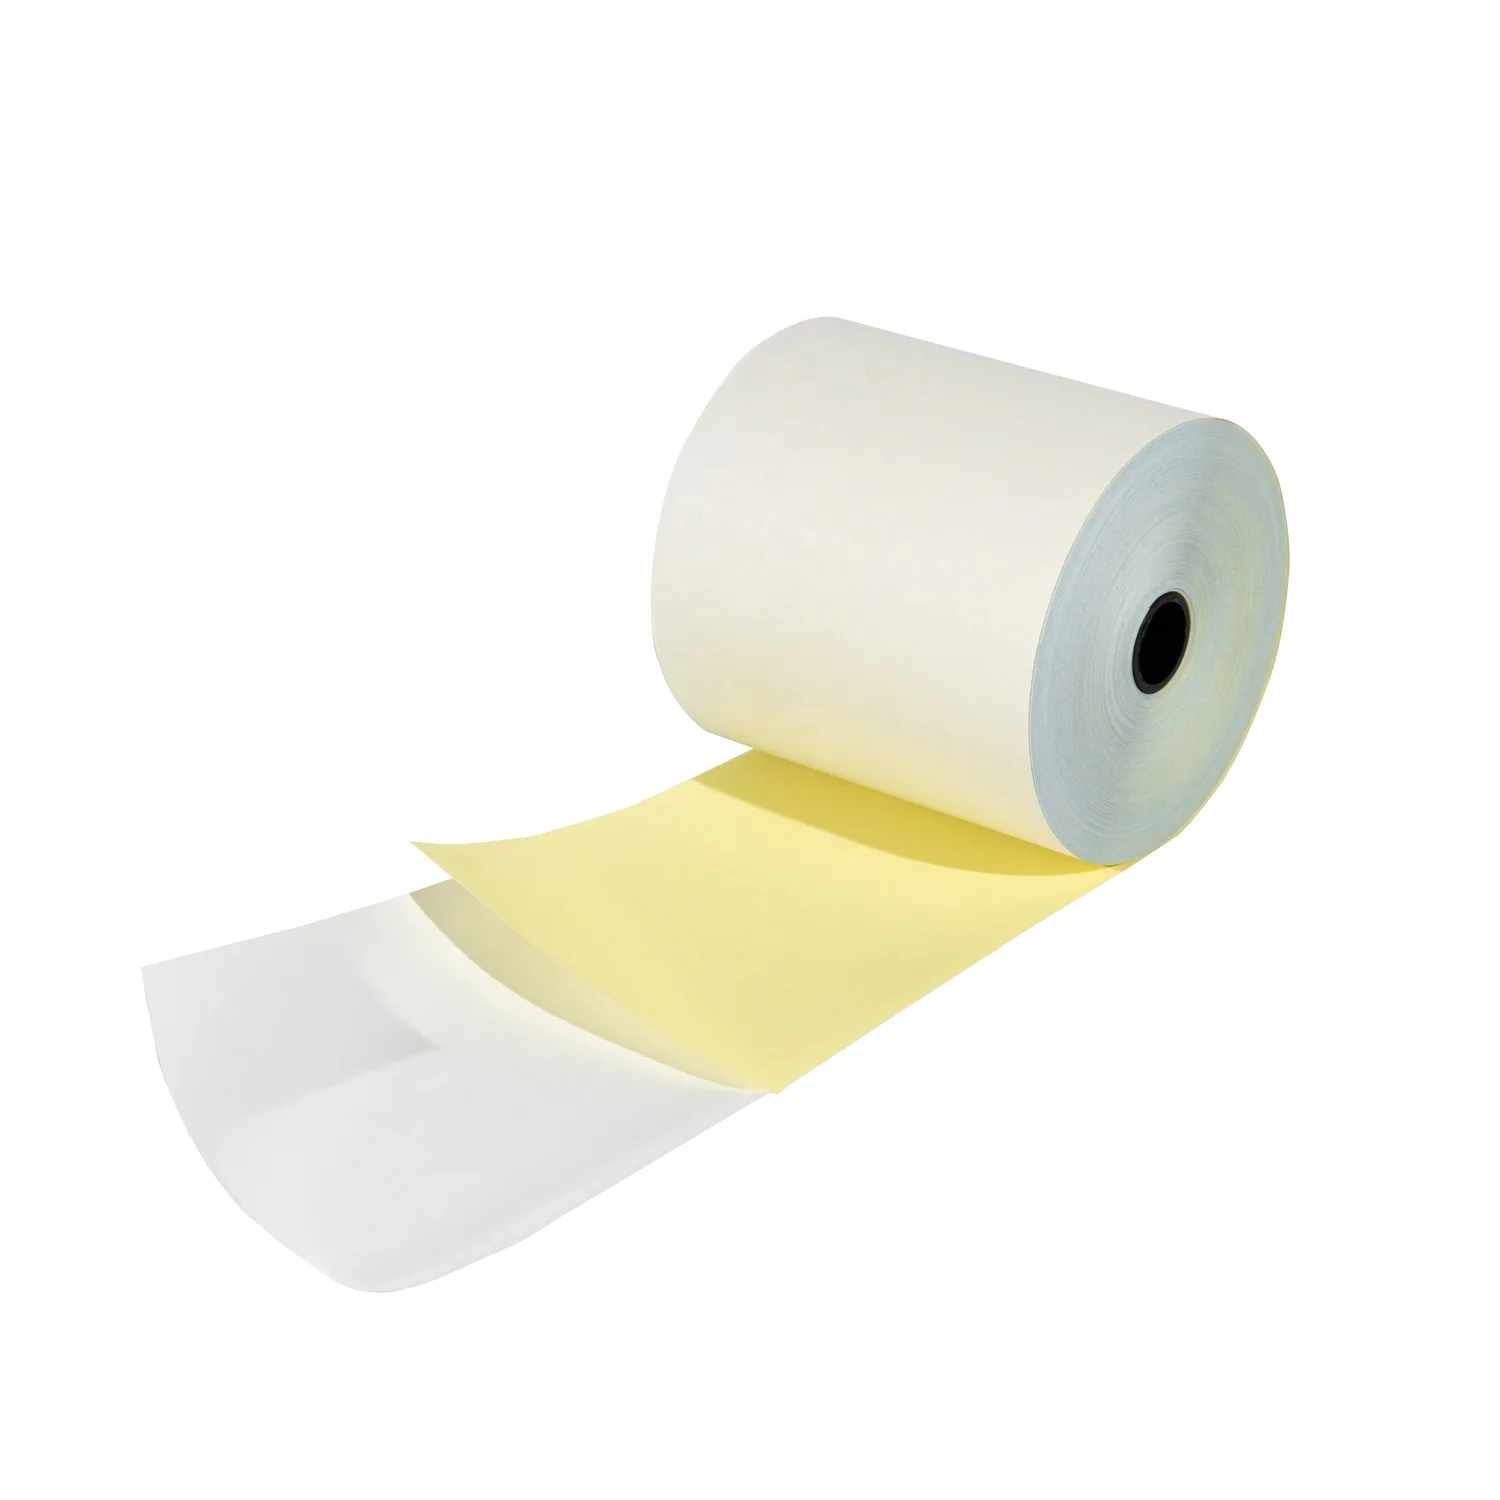 Print clearly pos paper 1*6plys ncr paper invoice receipt carbonless paper roll